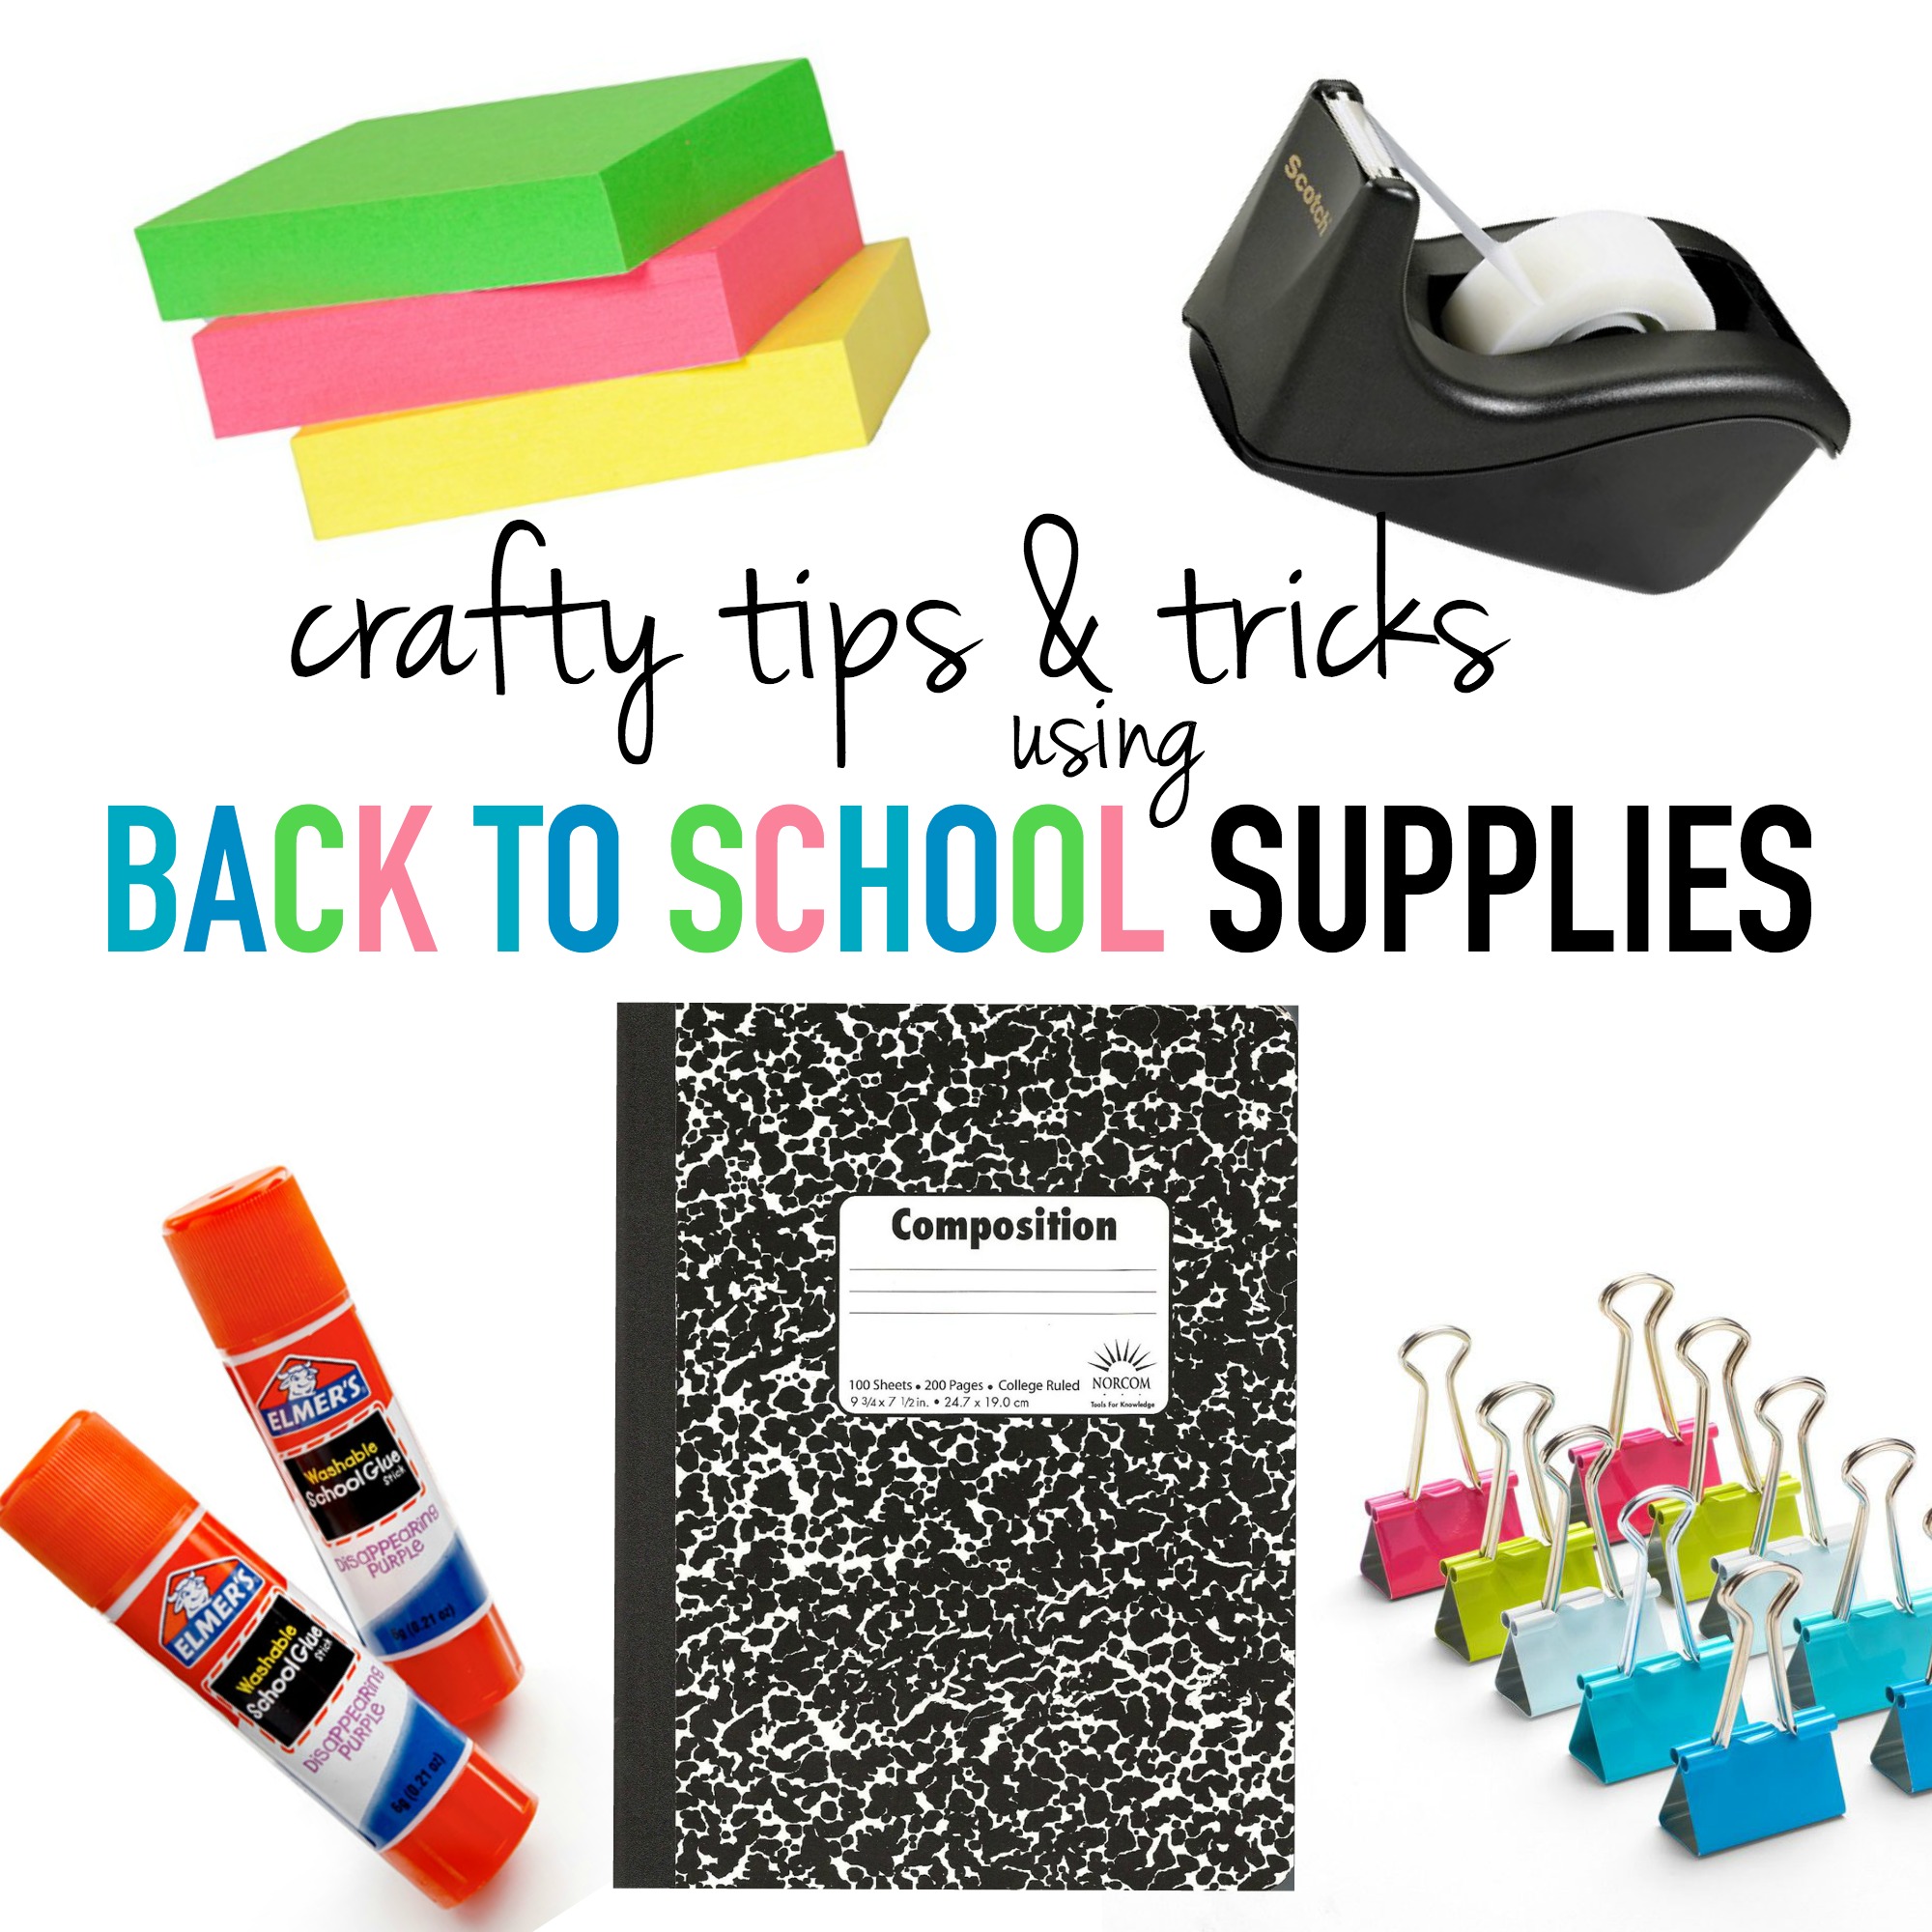 Crafty Tips & Tricks using Back to School Supplies